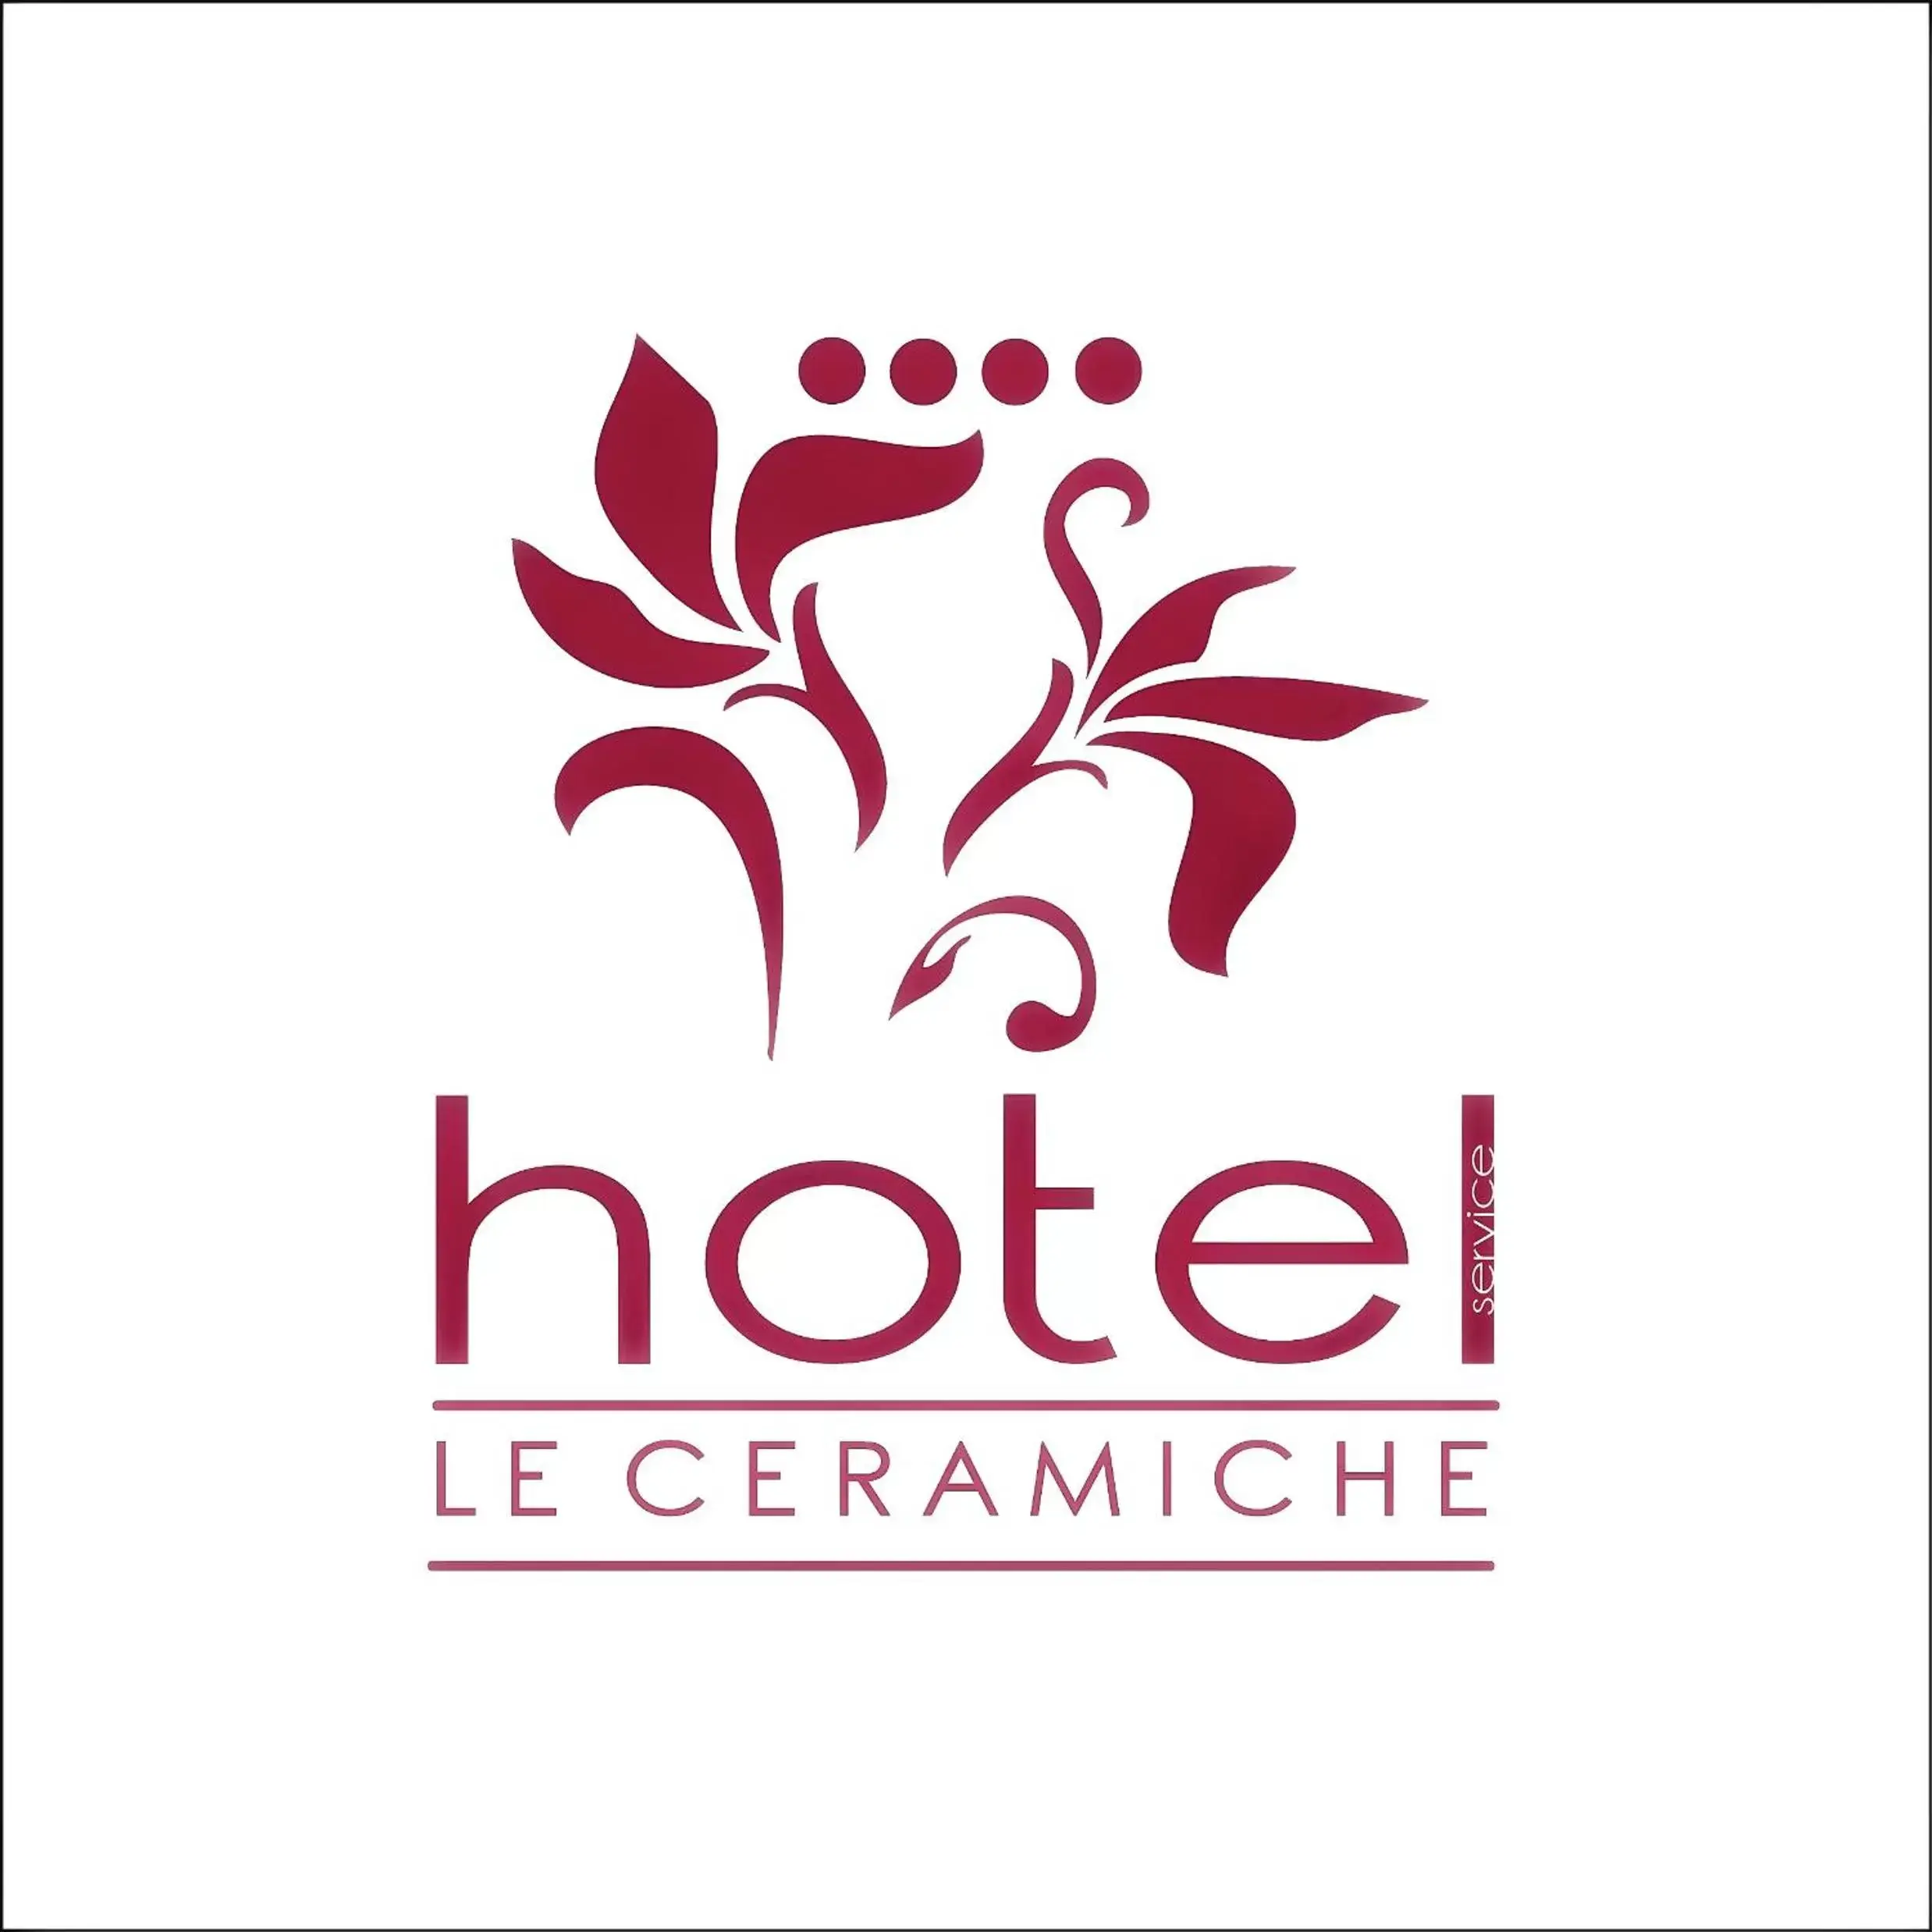 Property logo or sign, Property Logo/Sign in Le Ceramiche - Hotel Residence ed Eventi